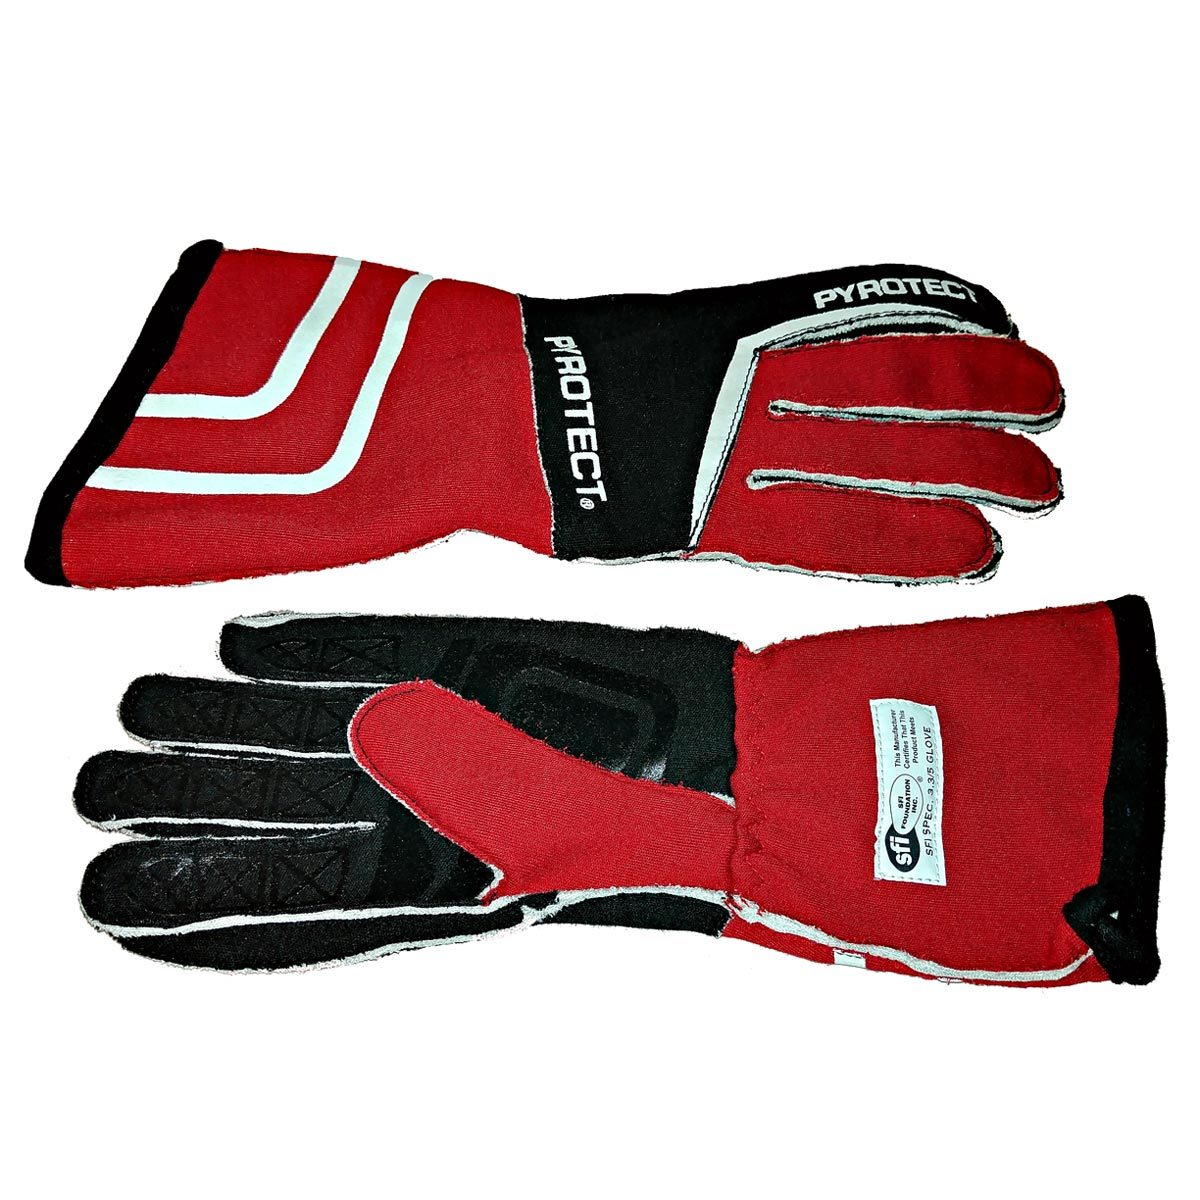 Pyrotect Glove Sport 2 Layer Blk /Red Med SFI-5 Safety Clothing Driving Gloves main image